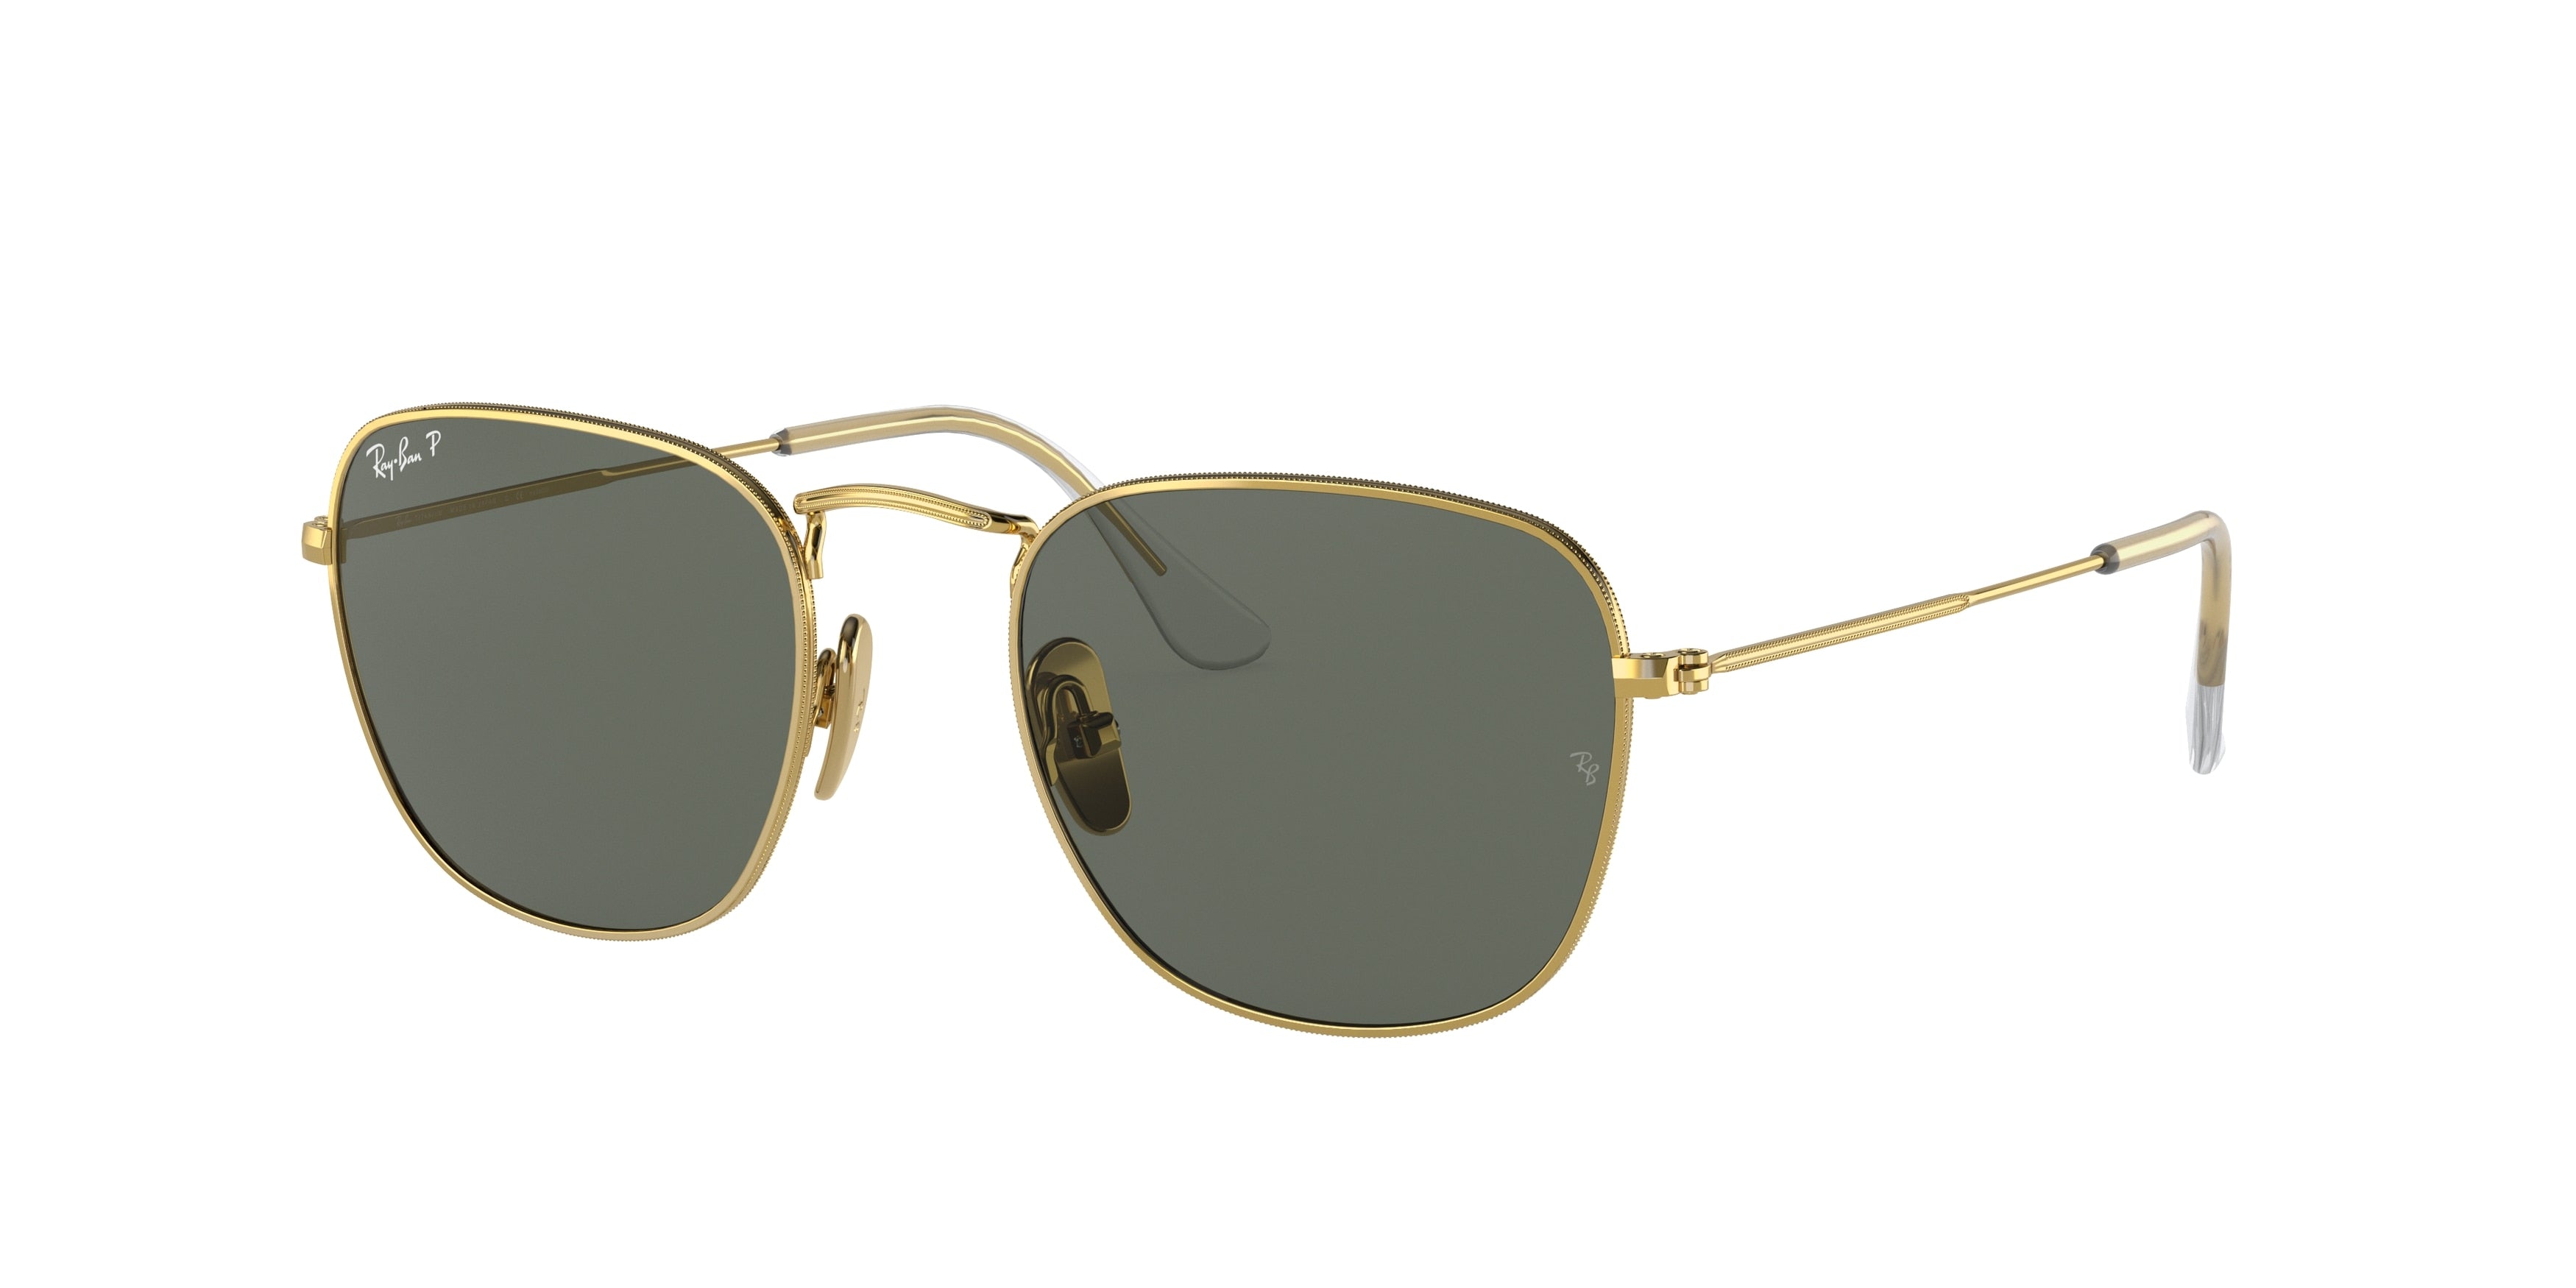 Ray-Ban FRANK RB8157 Square Sunglasses  921658-Gold 51-145-20 - Color Map Gold